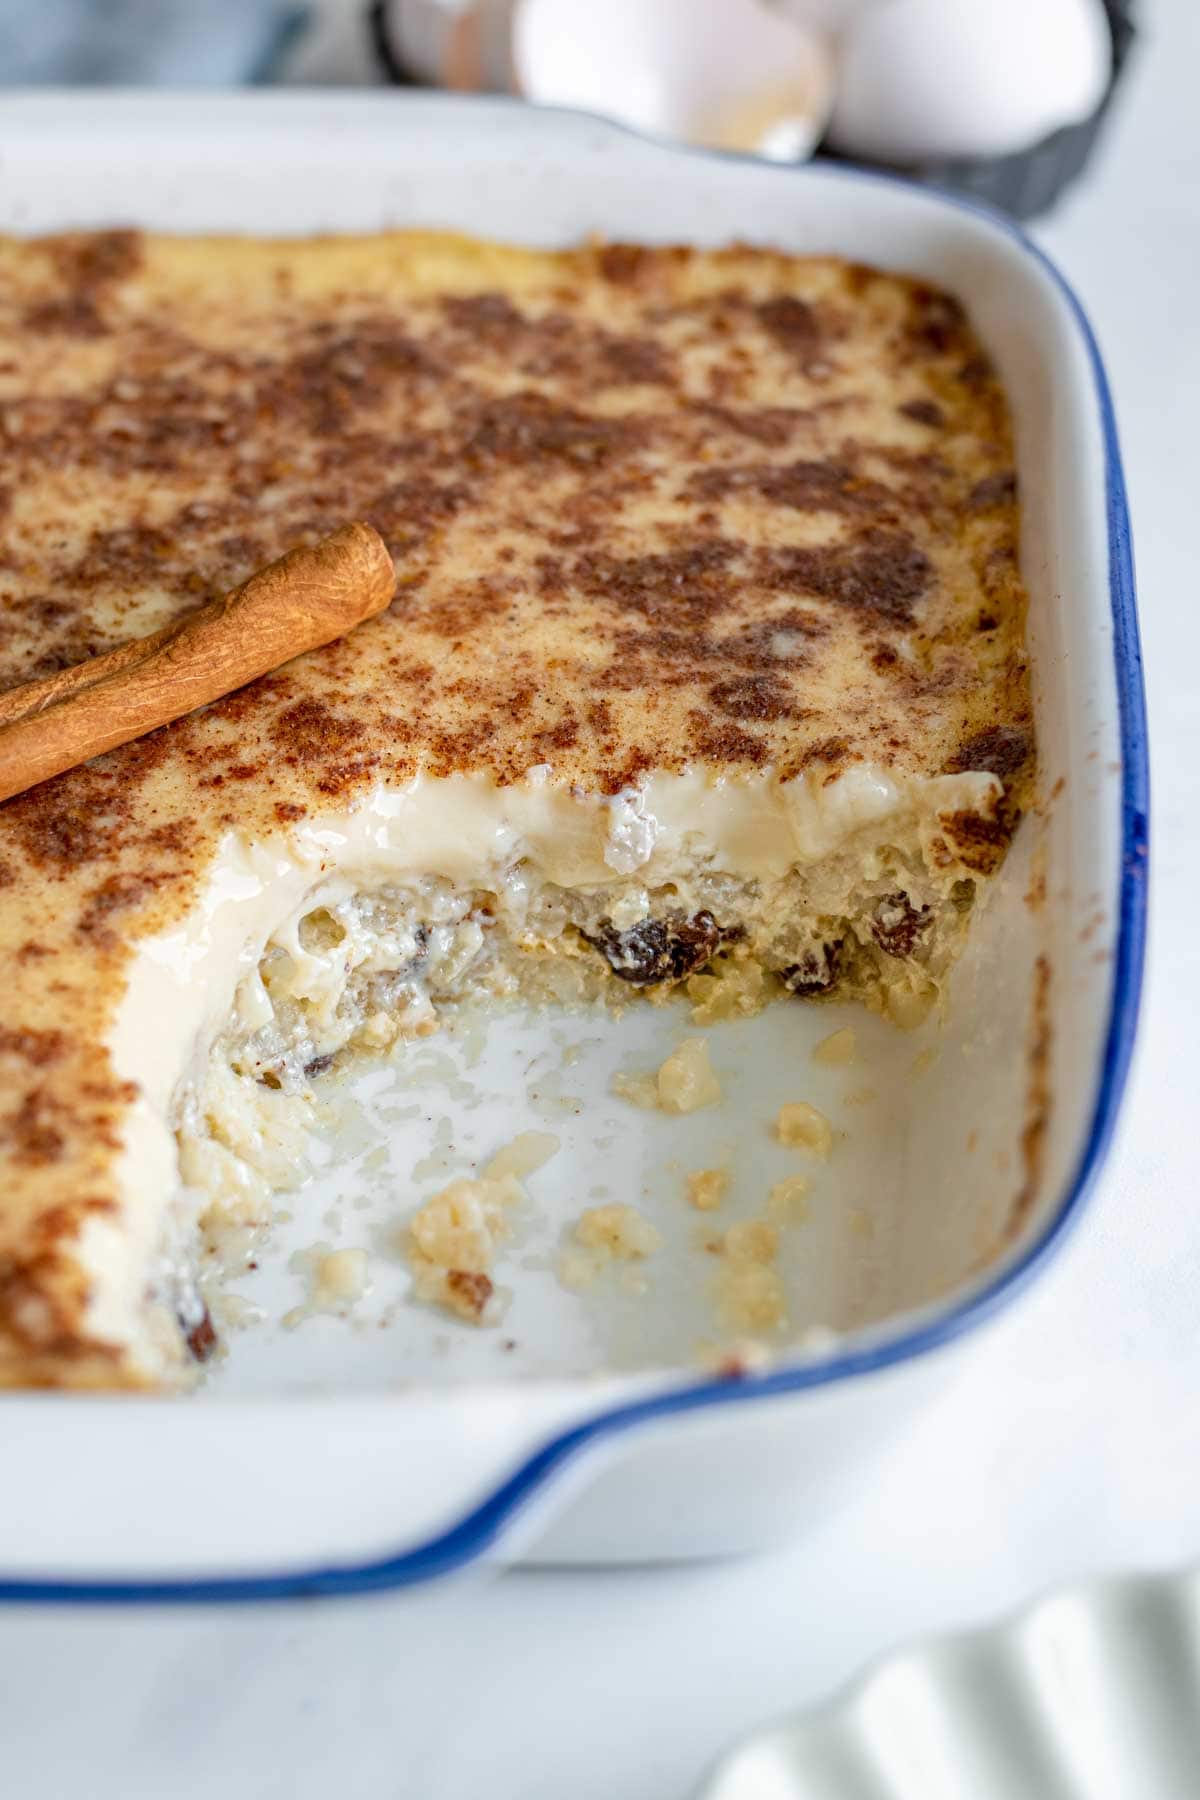 Baked Rice Pudding cooked pudding in a baking dish serving missing